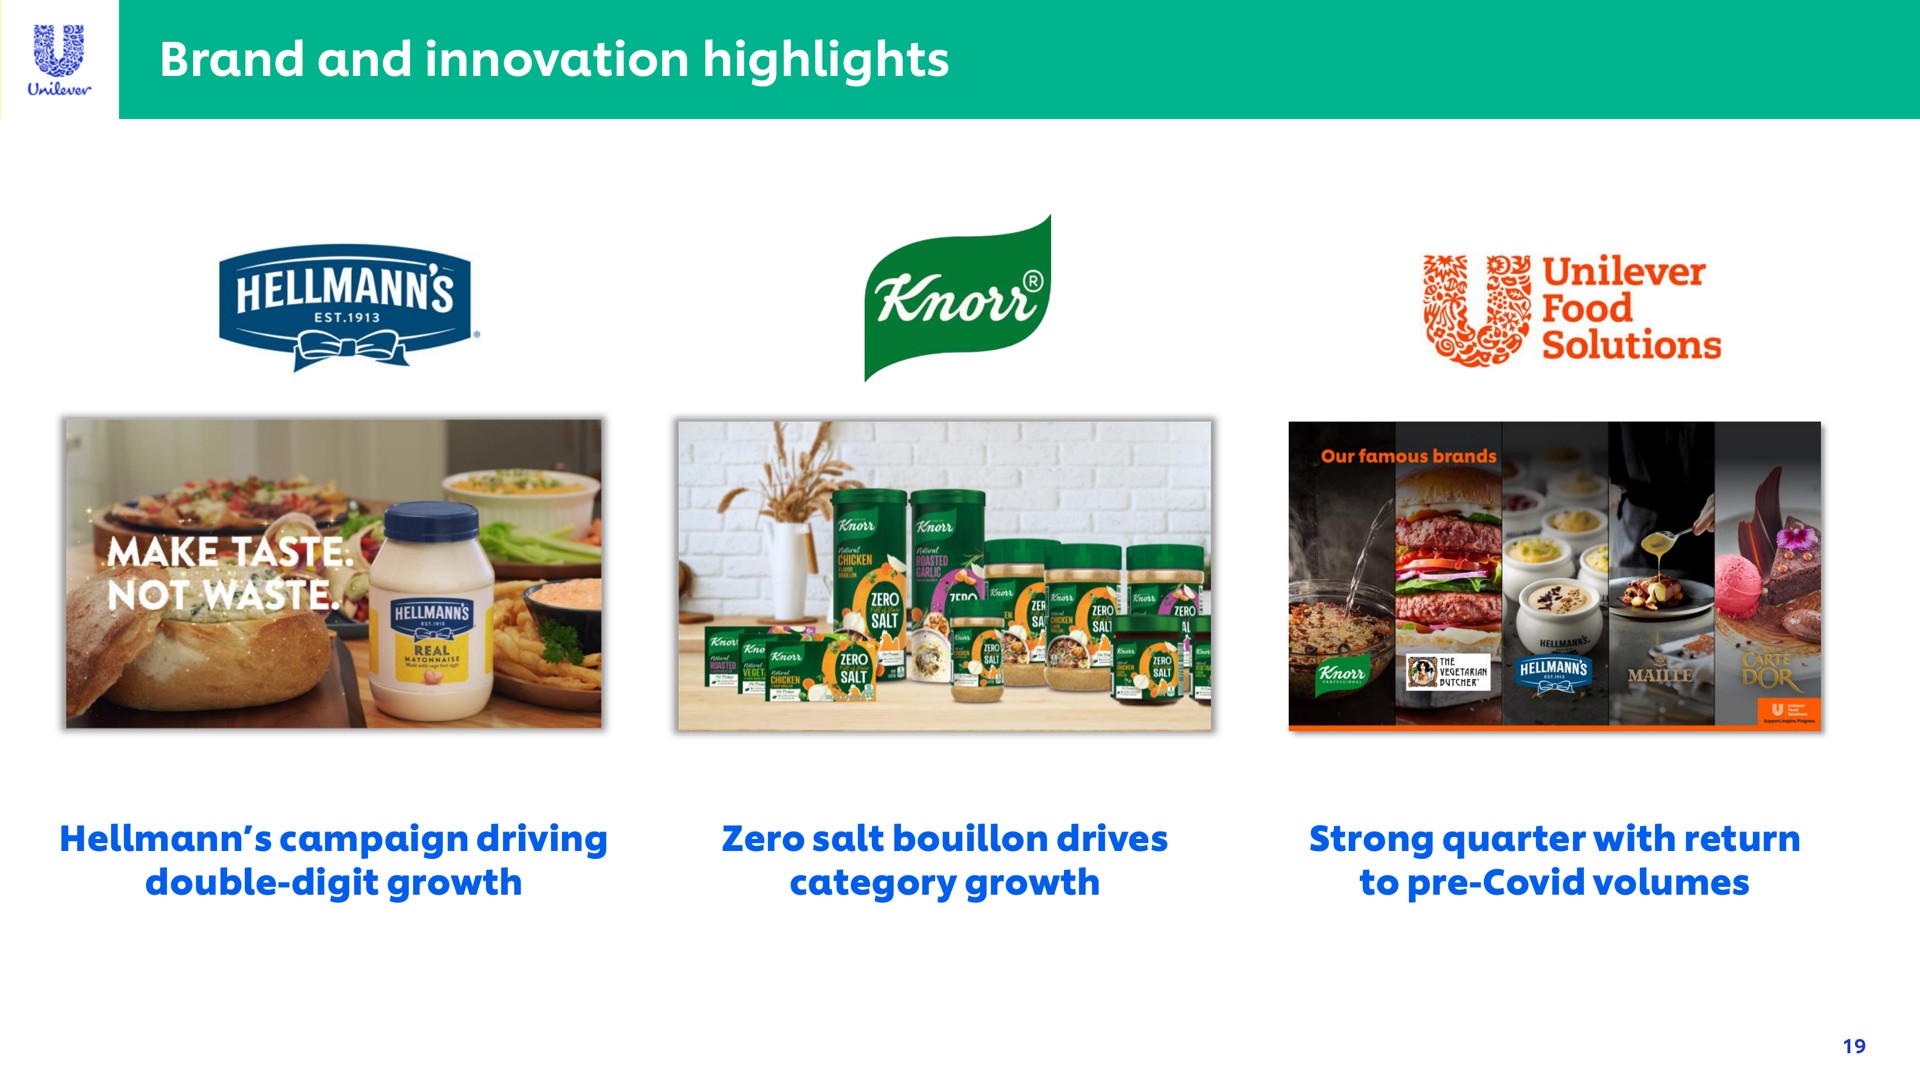 brand and innovation highlights as food solutions | Unilever